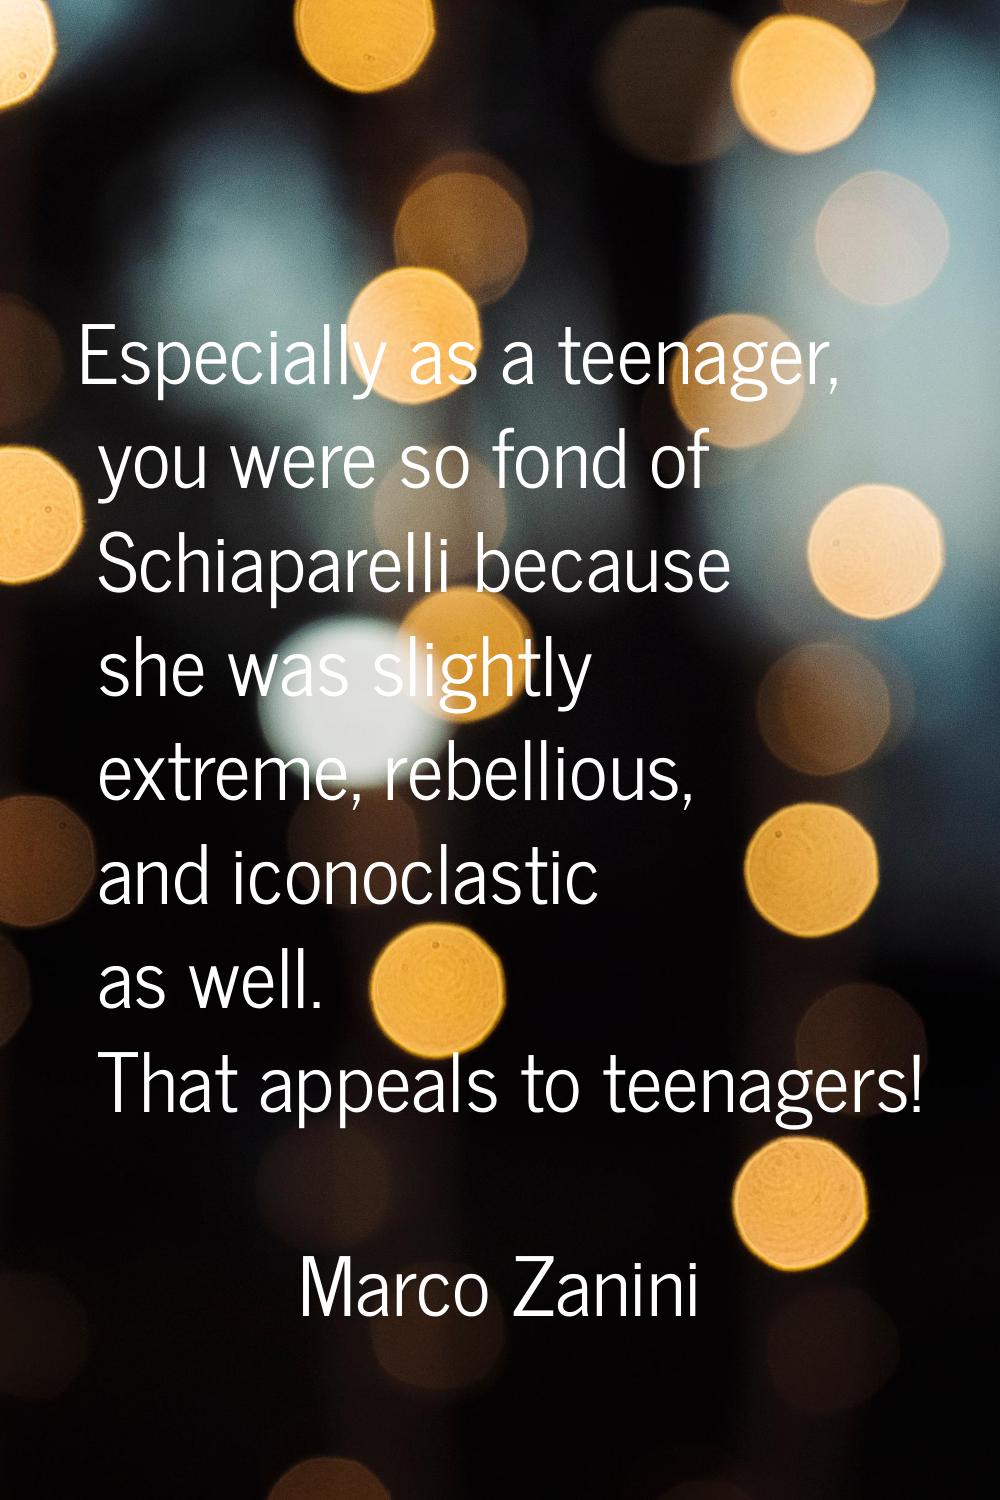 Especially as a teenager, you were so fond of Schiaparelli because she was slightly extreme, rebell